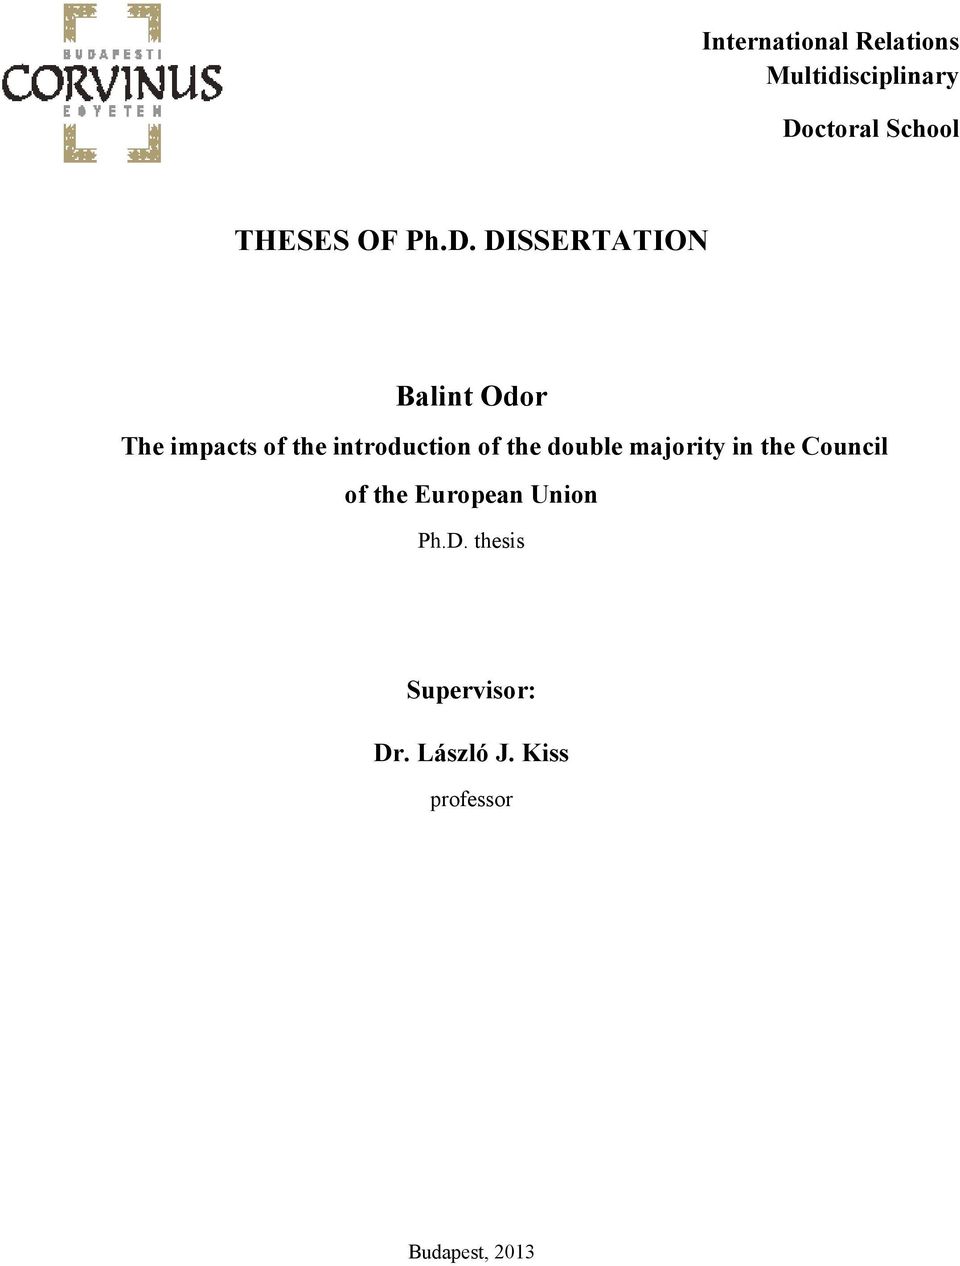 DISSERTATION Balint Odor The impacts of the introduction of the